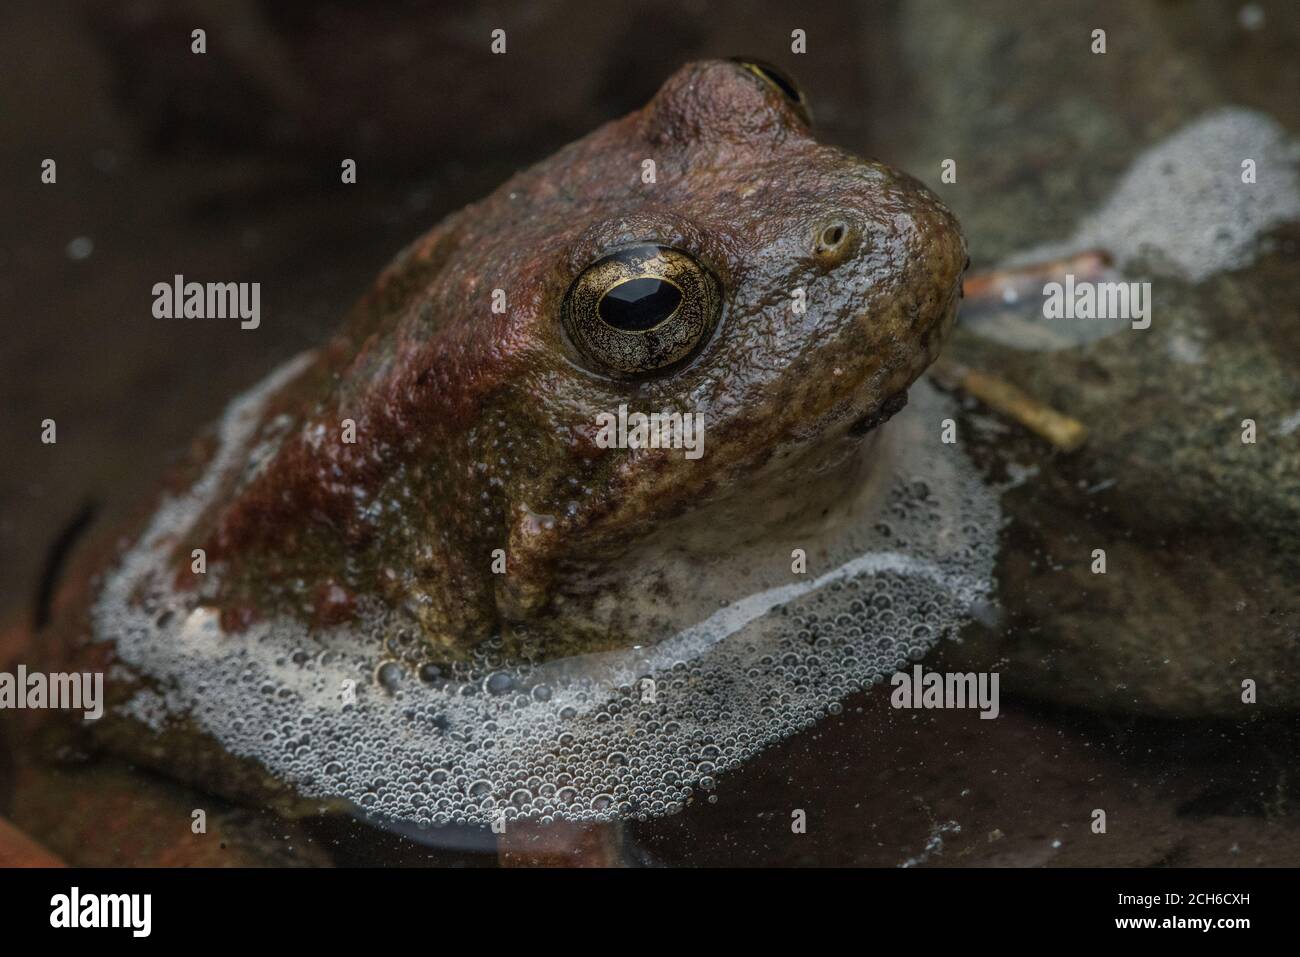 A yellow legged frog (Rana boylii) a threatened amphibian species from the West Coast in the USA. Stock Photo